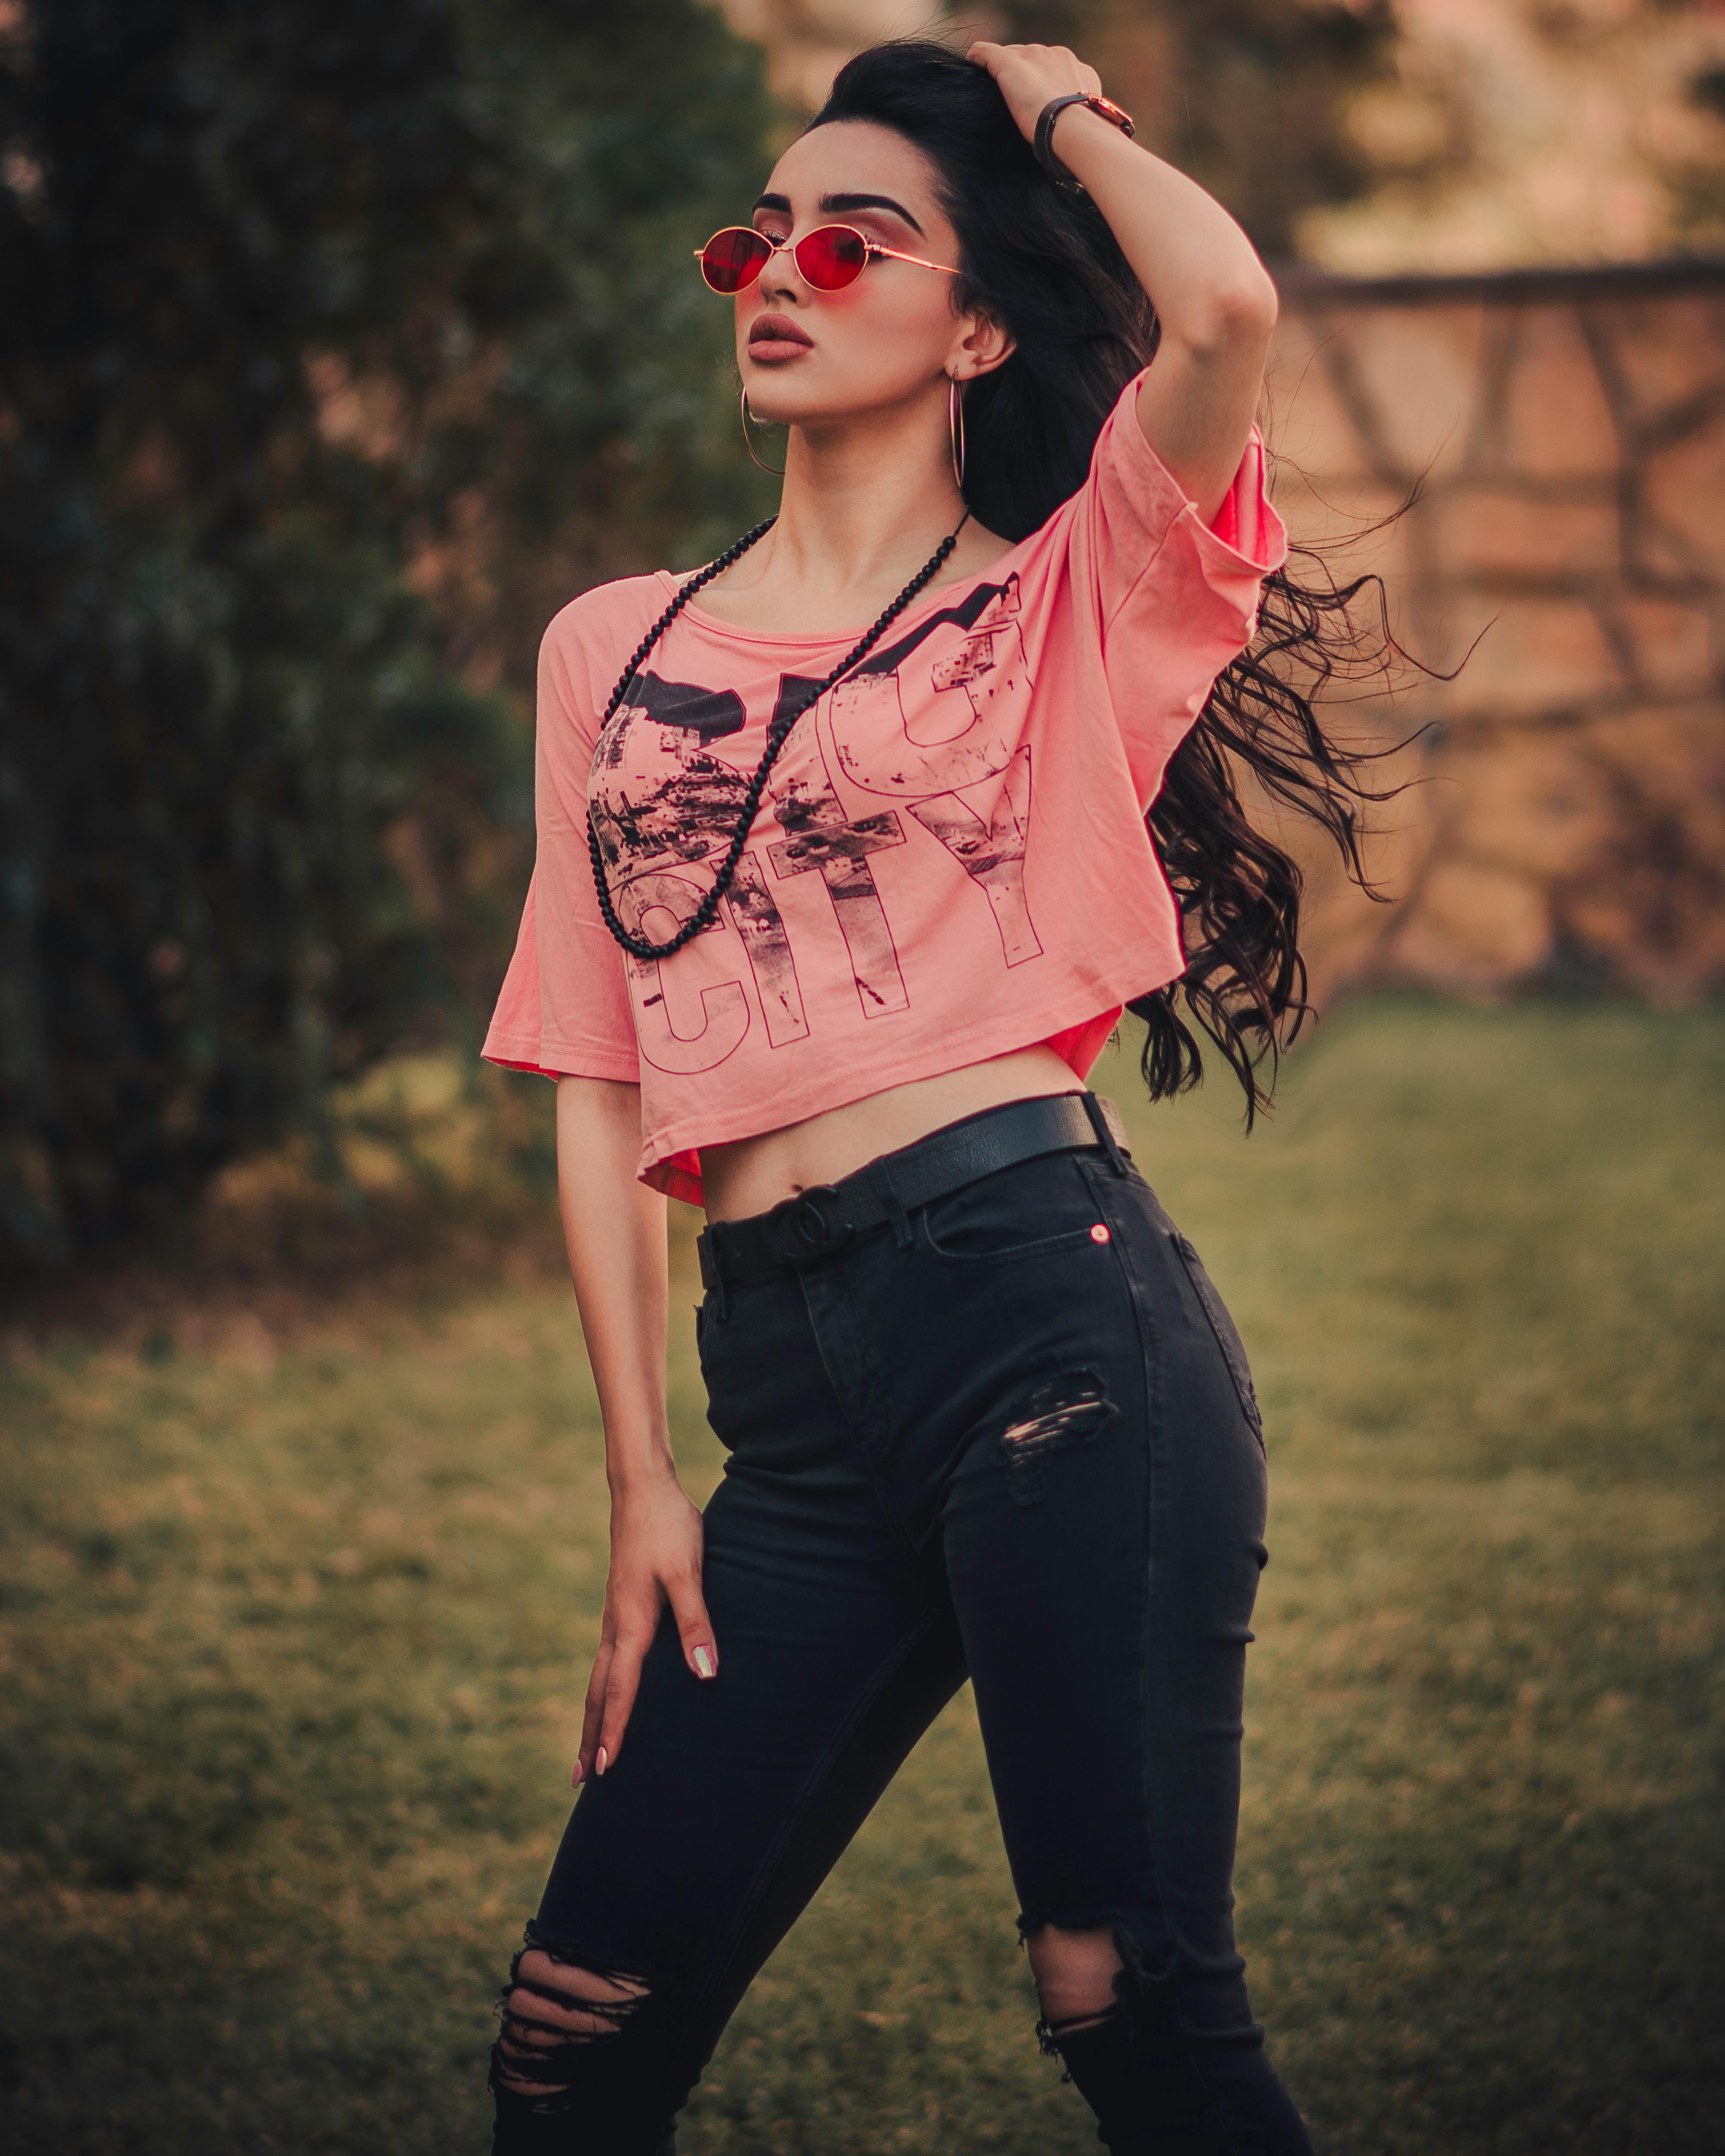 black jeans and pink shirt